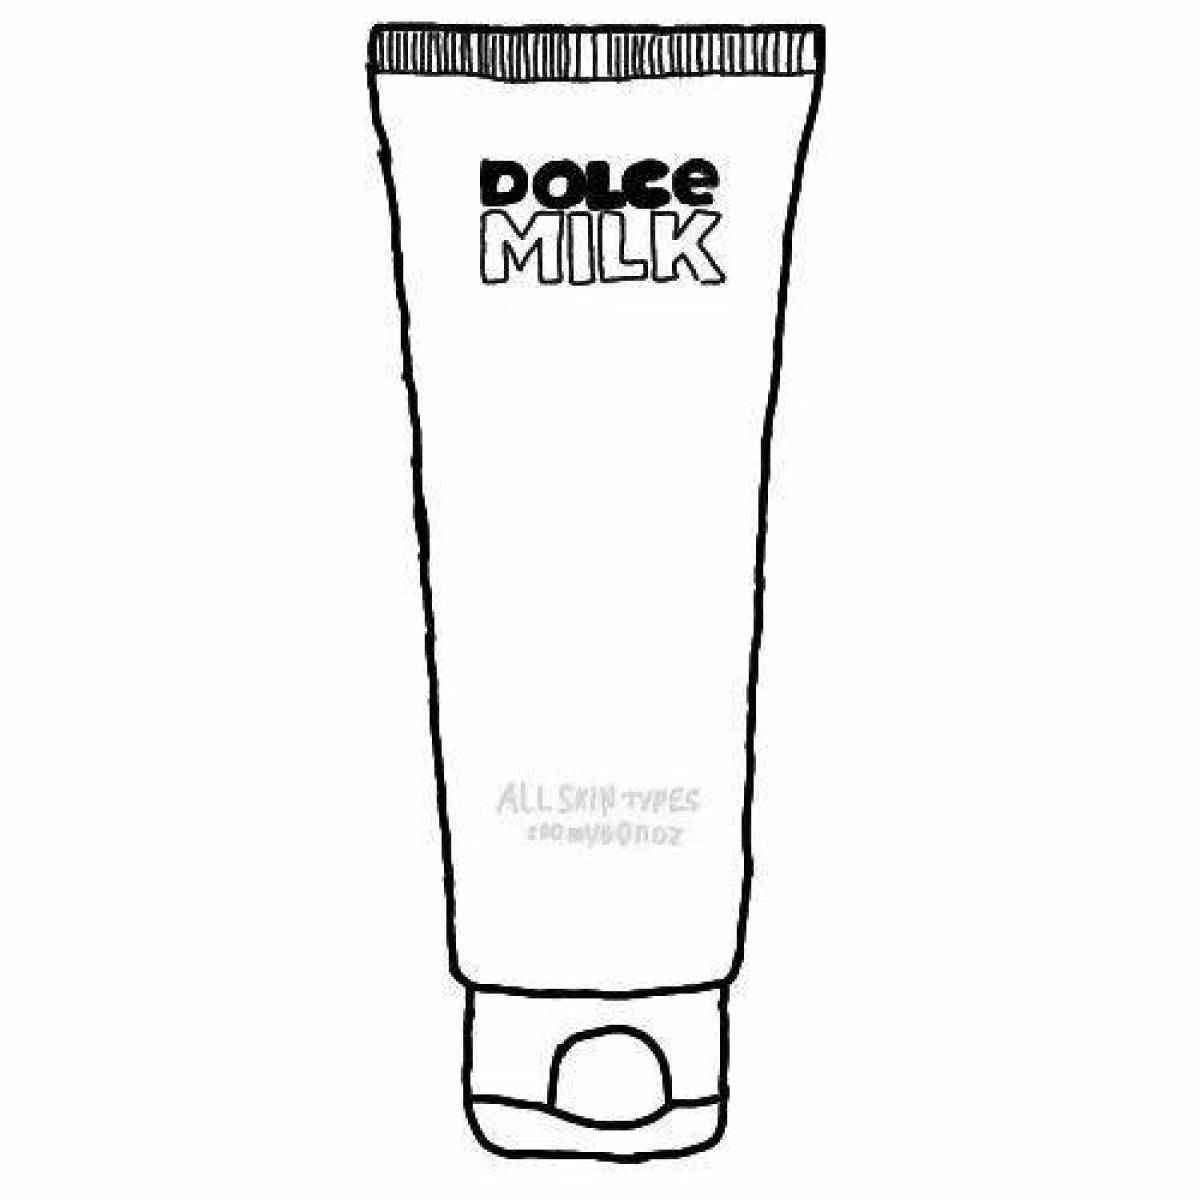 Awesome dolce milk lipstick coloring page